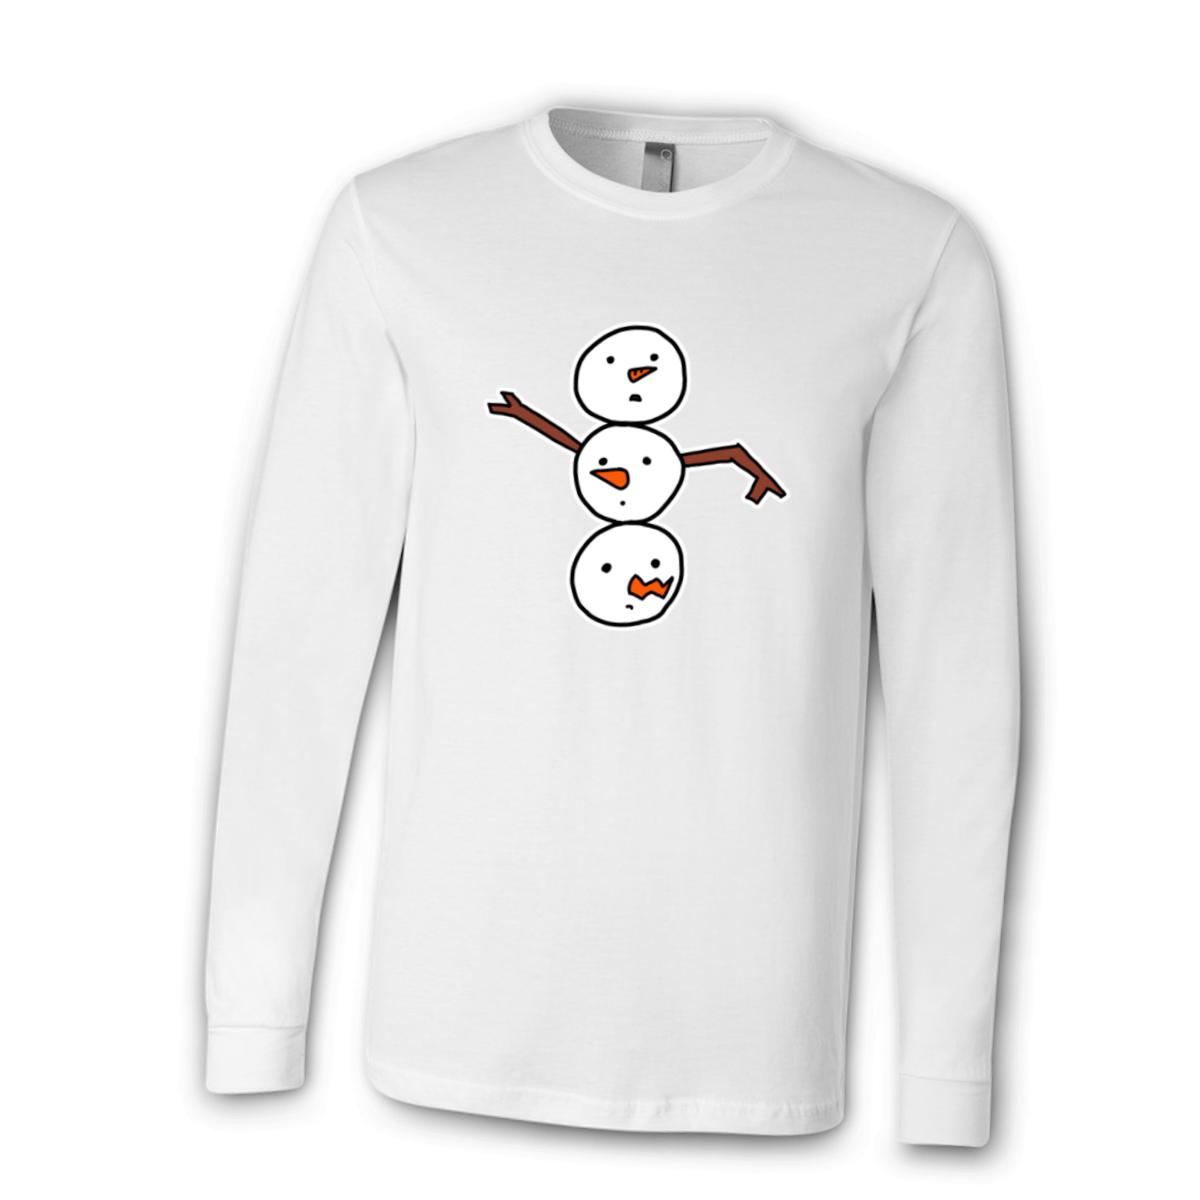 Snowman All Heads Unisex Long Sleeve Tee Large white